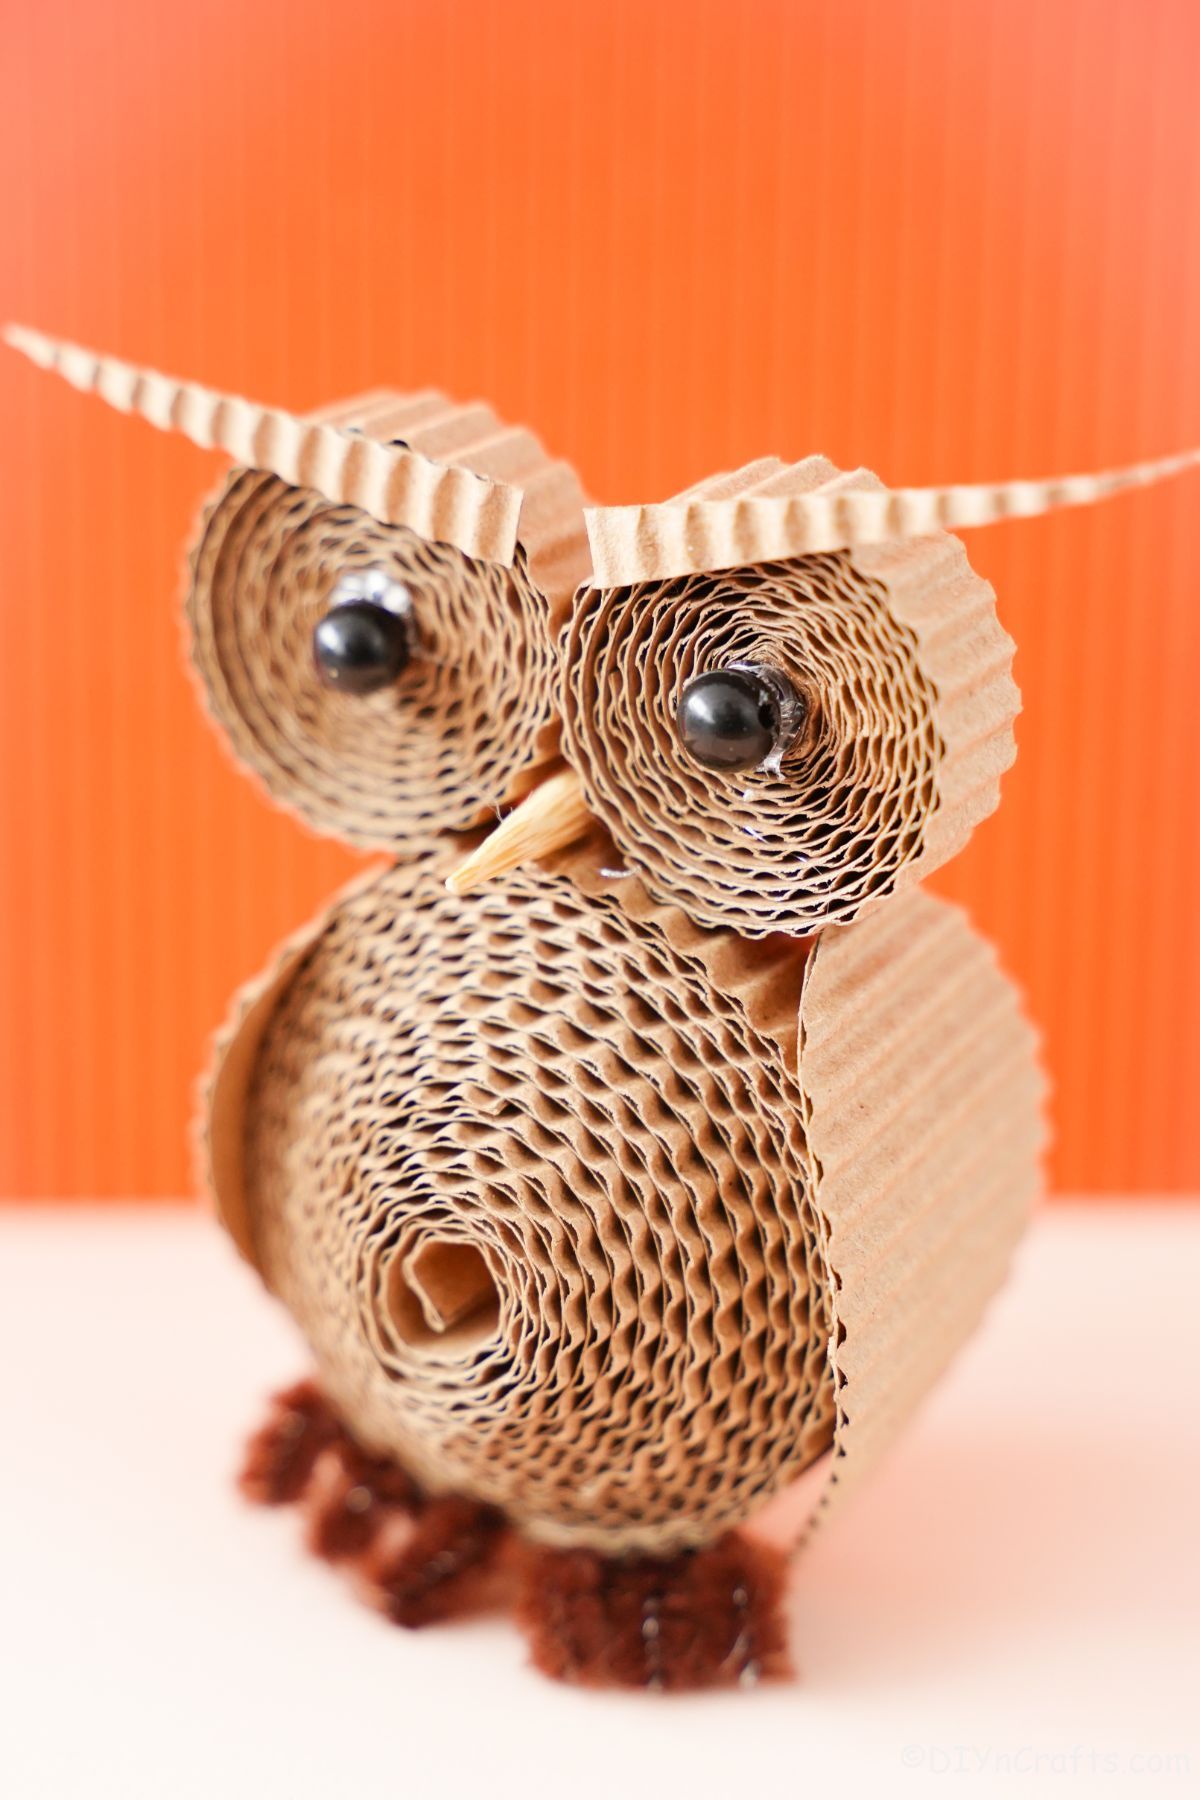 cardboard owl with black bead eyes in front of orange background